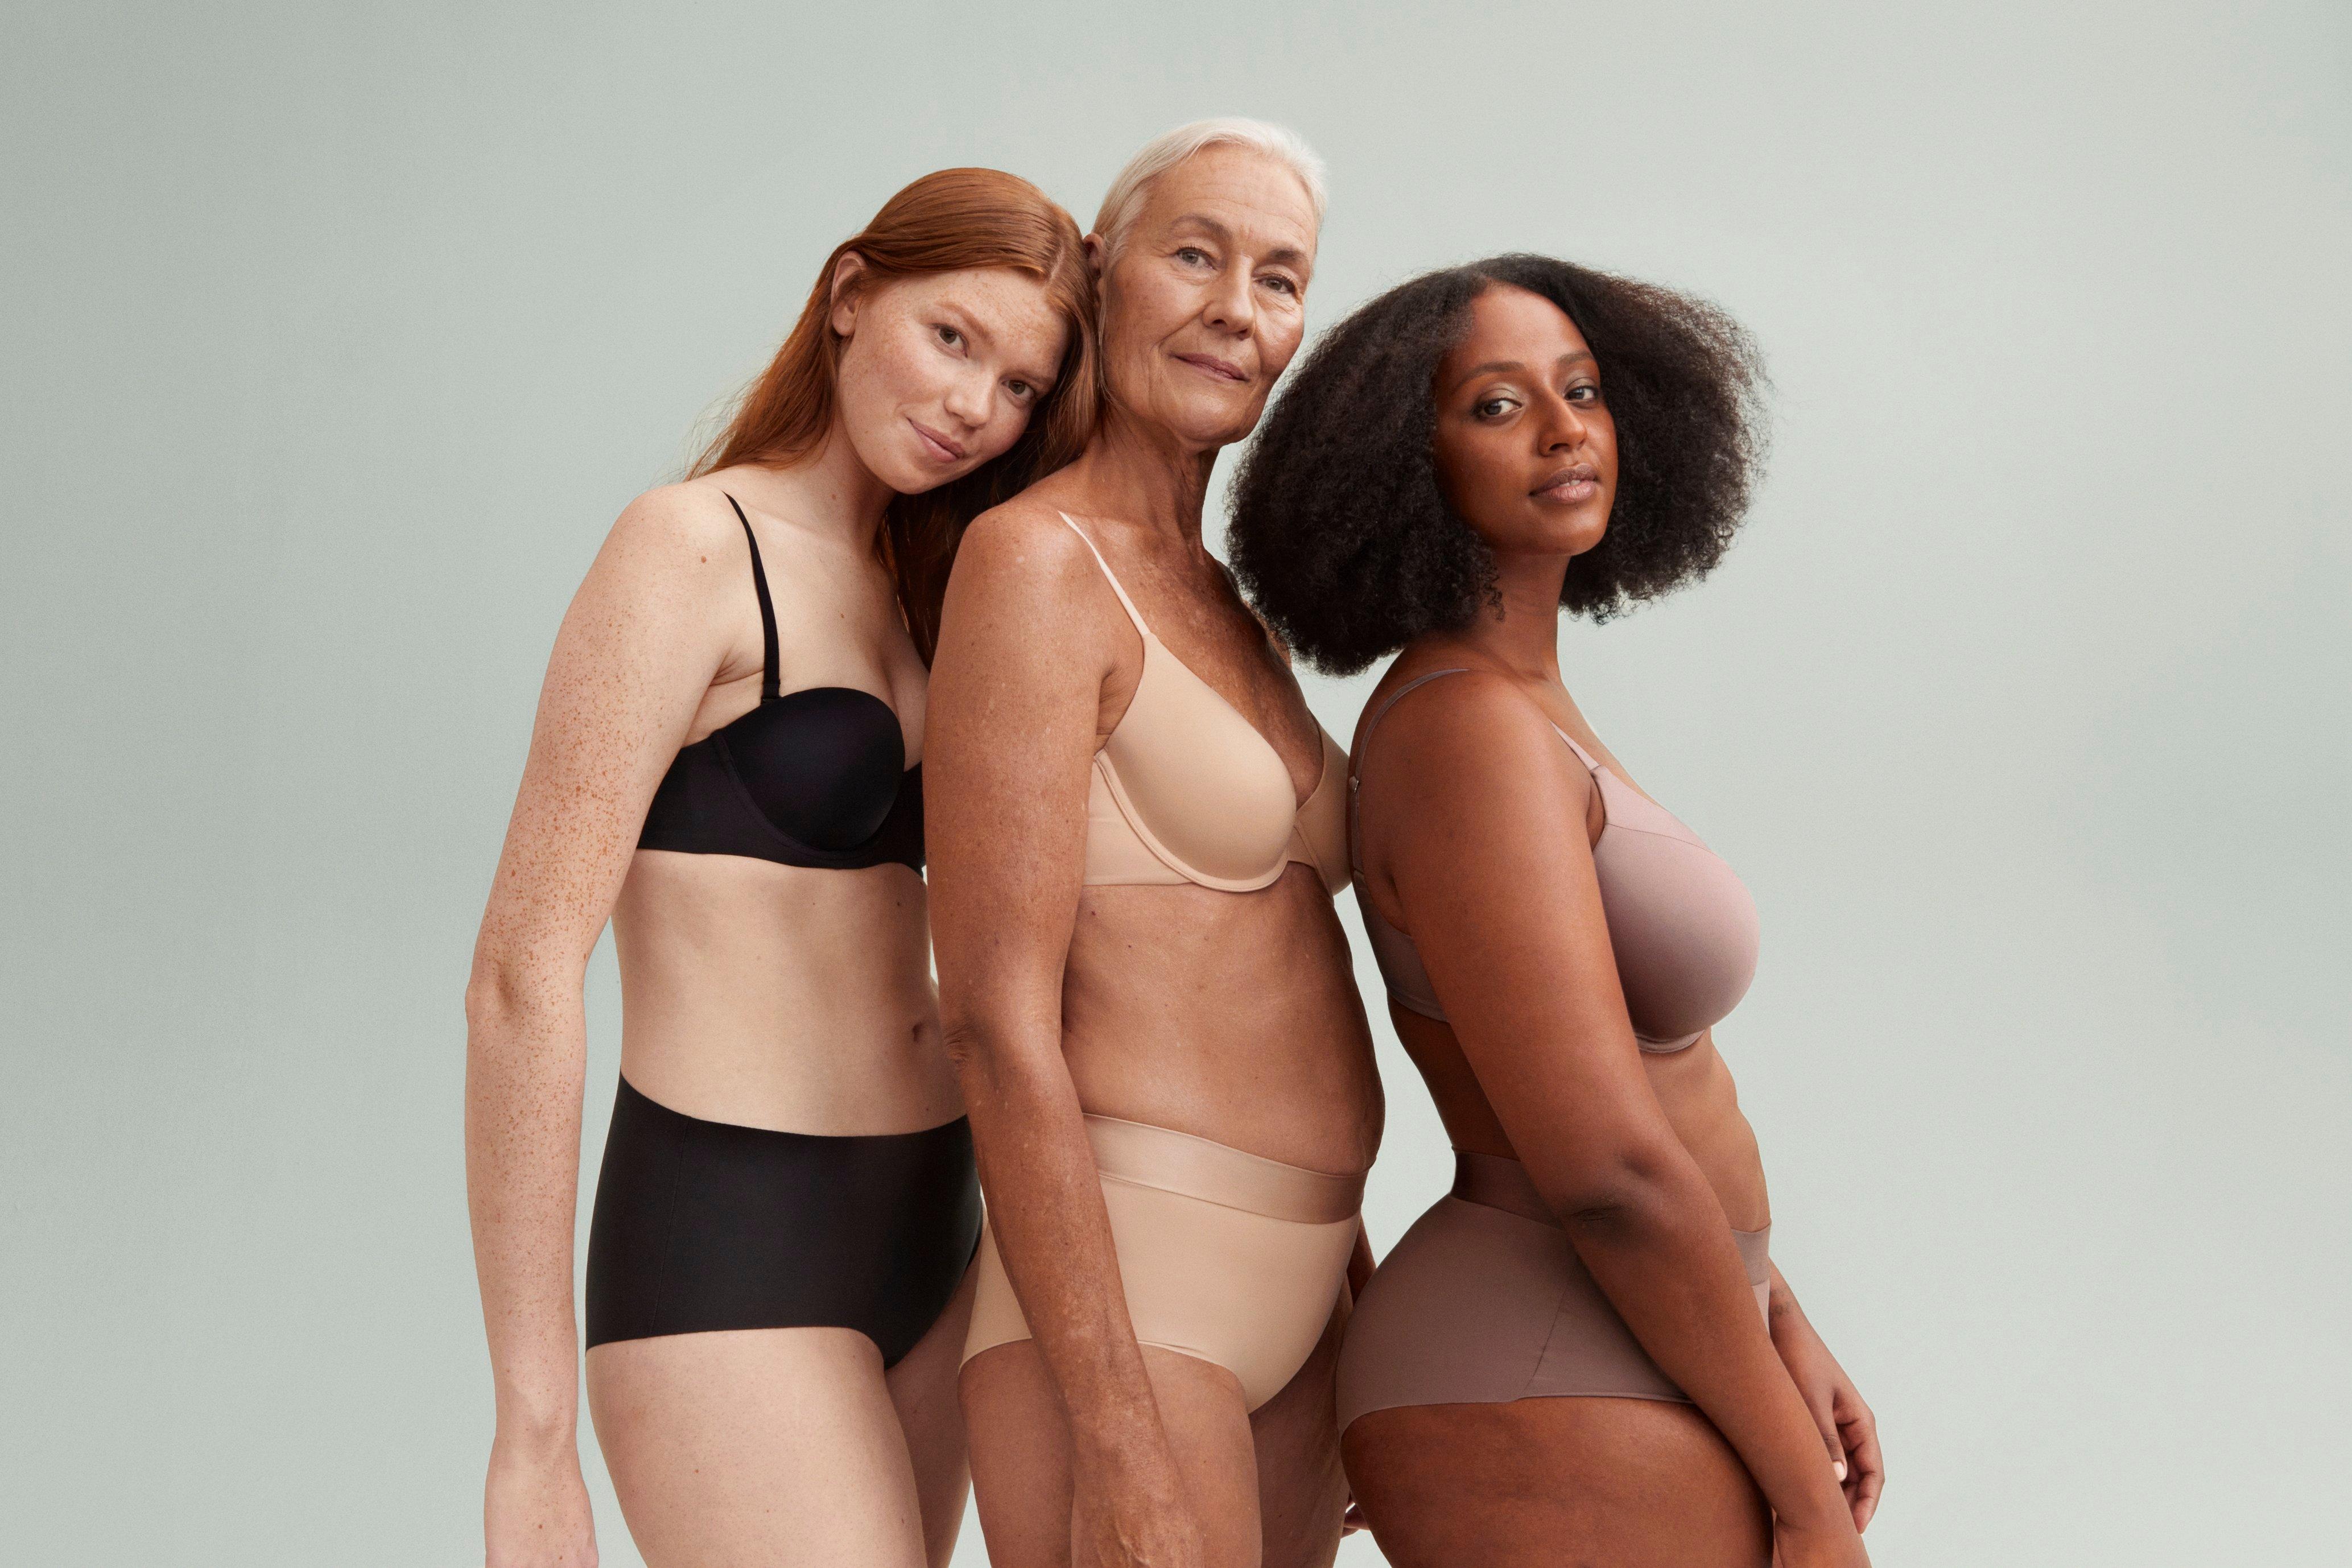 3 women standing together in bras and briefs